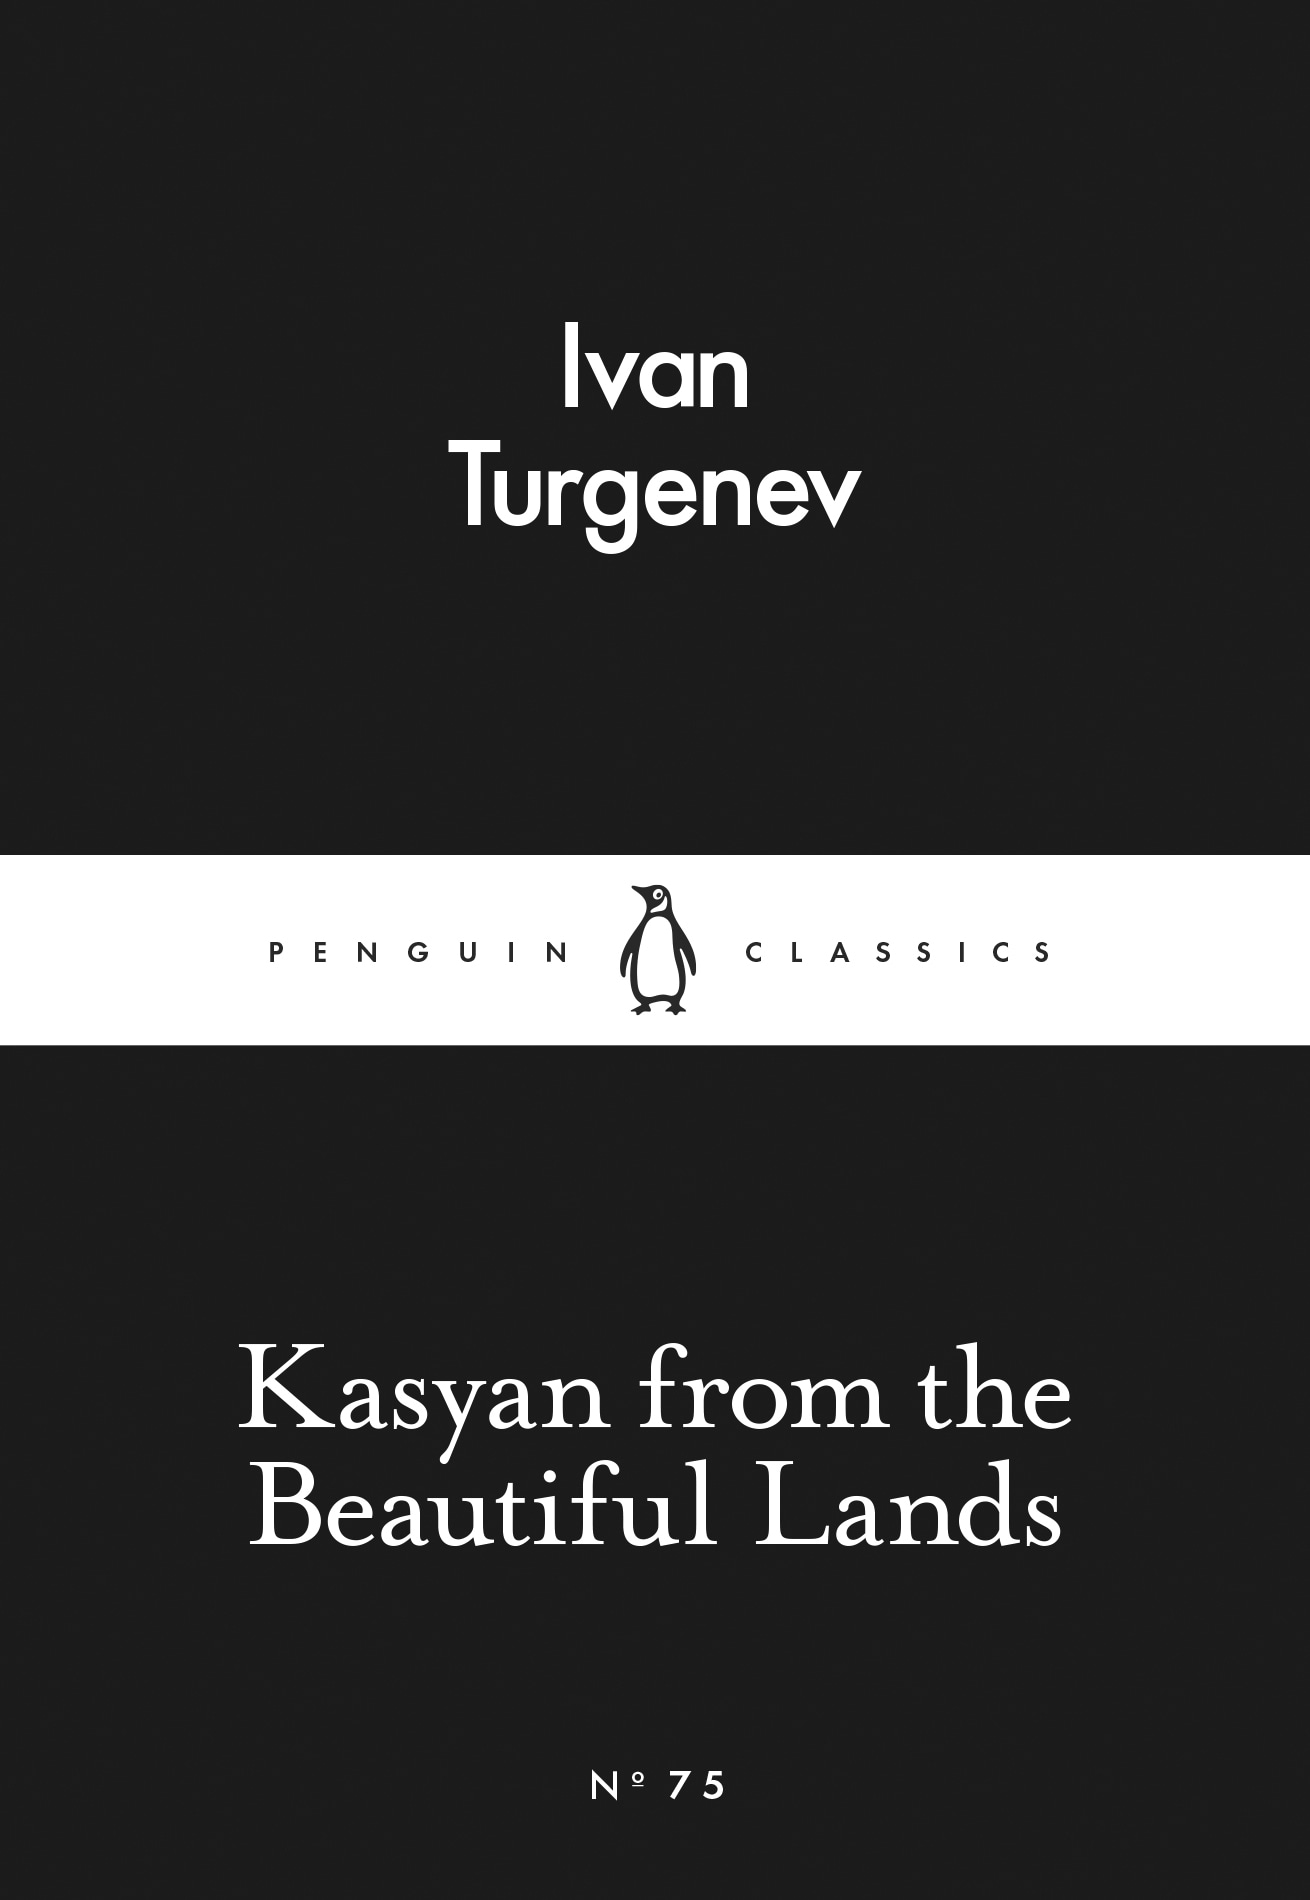 Book “Kasyan from the Beautiful Lands” by Ivan Turgenev — February 26, 2015